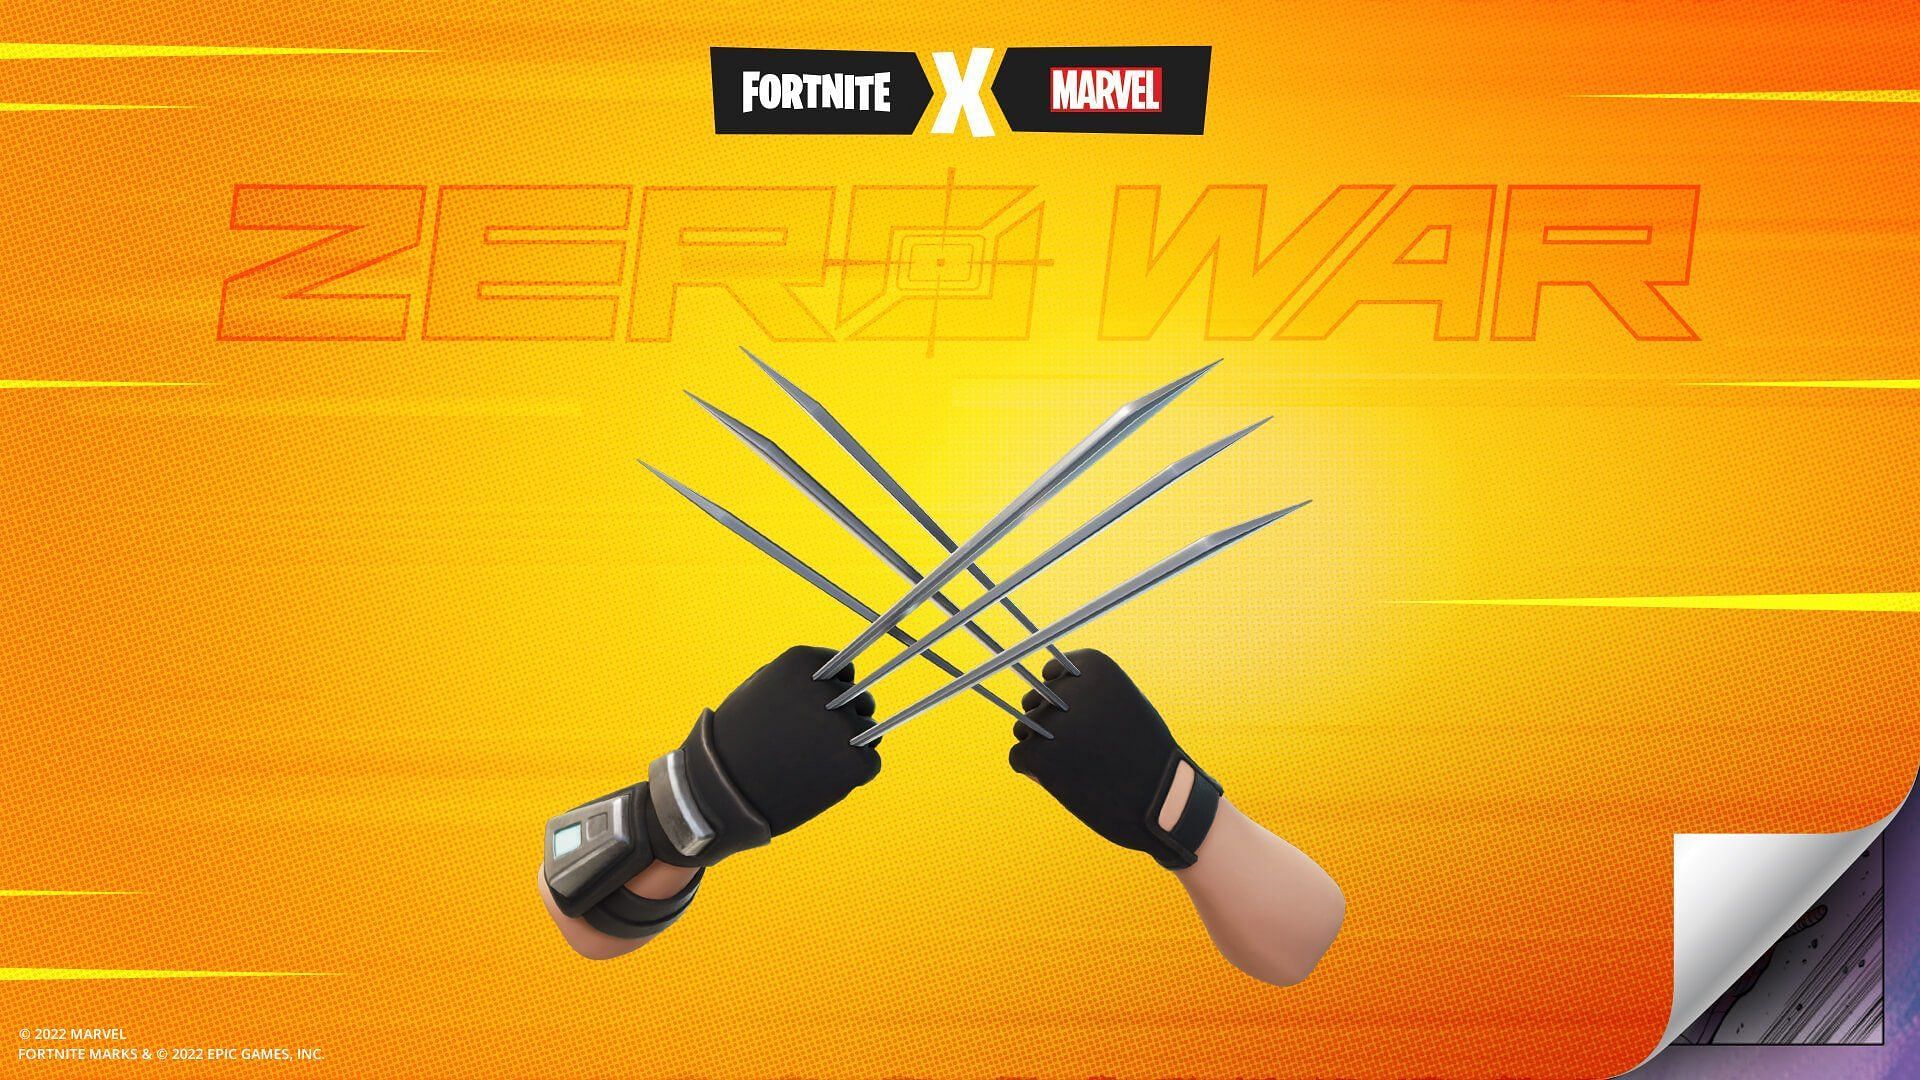 Adamantium Claws pickaxe is a new Fortnite Battle Royale cosmetic item (Image via Epic Games)